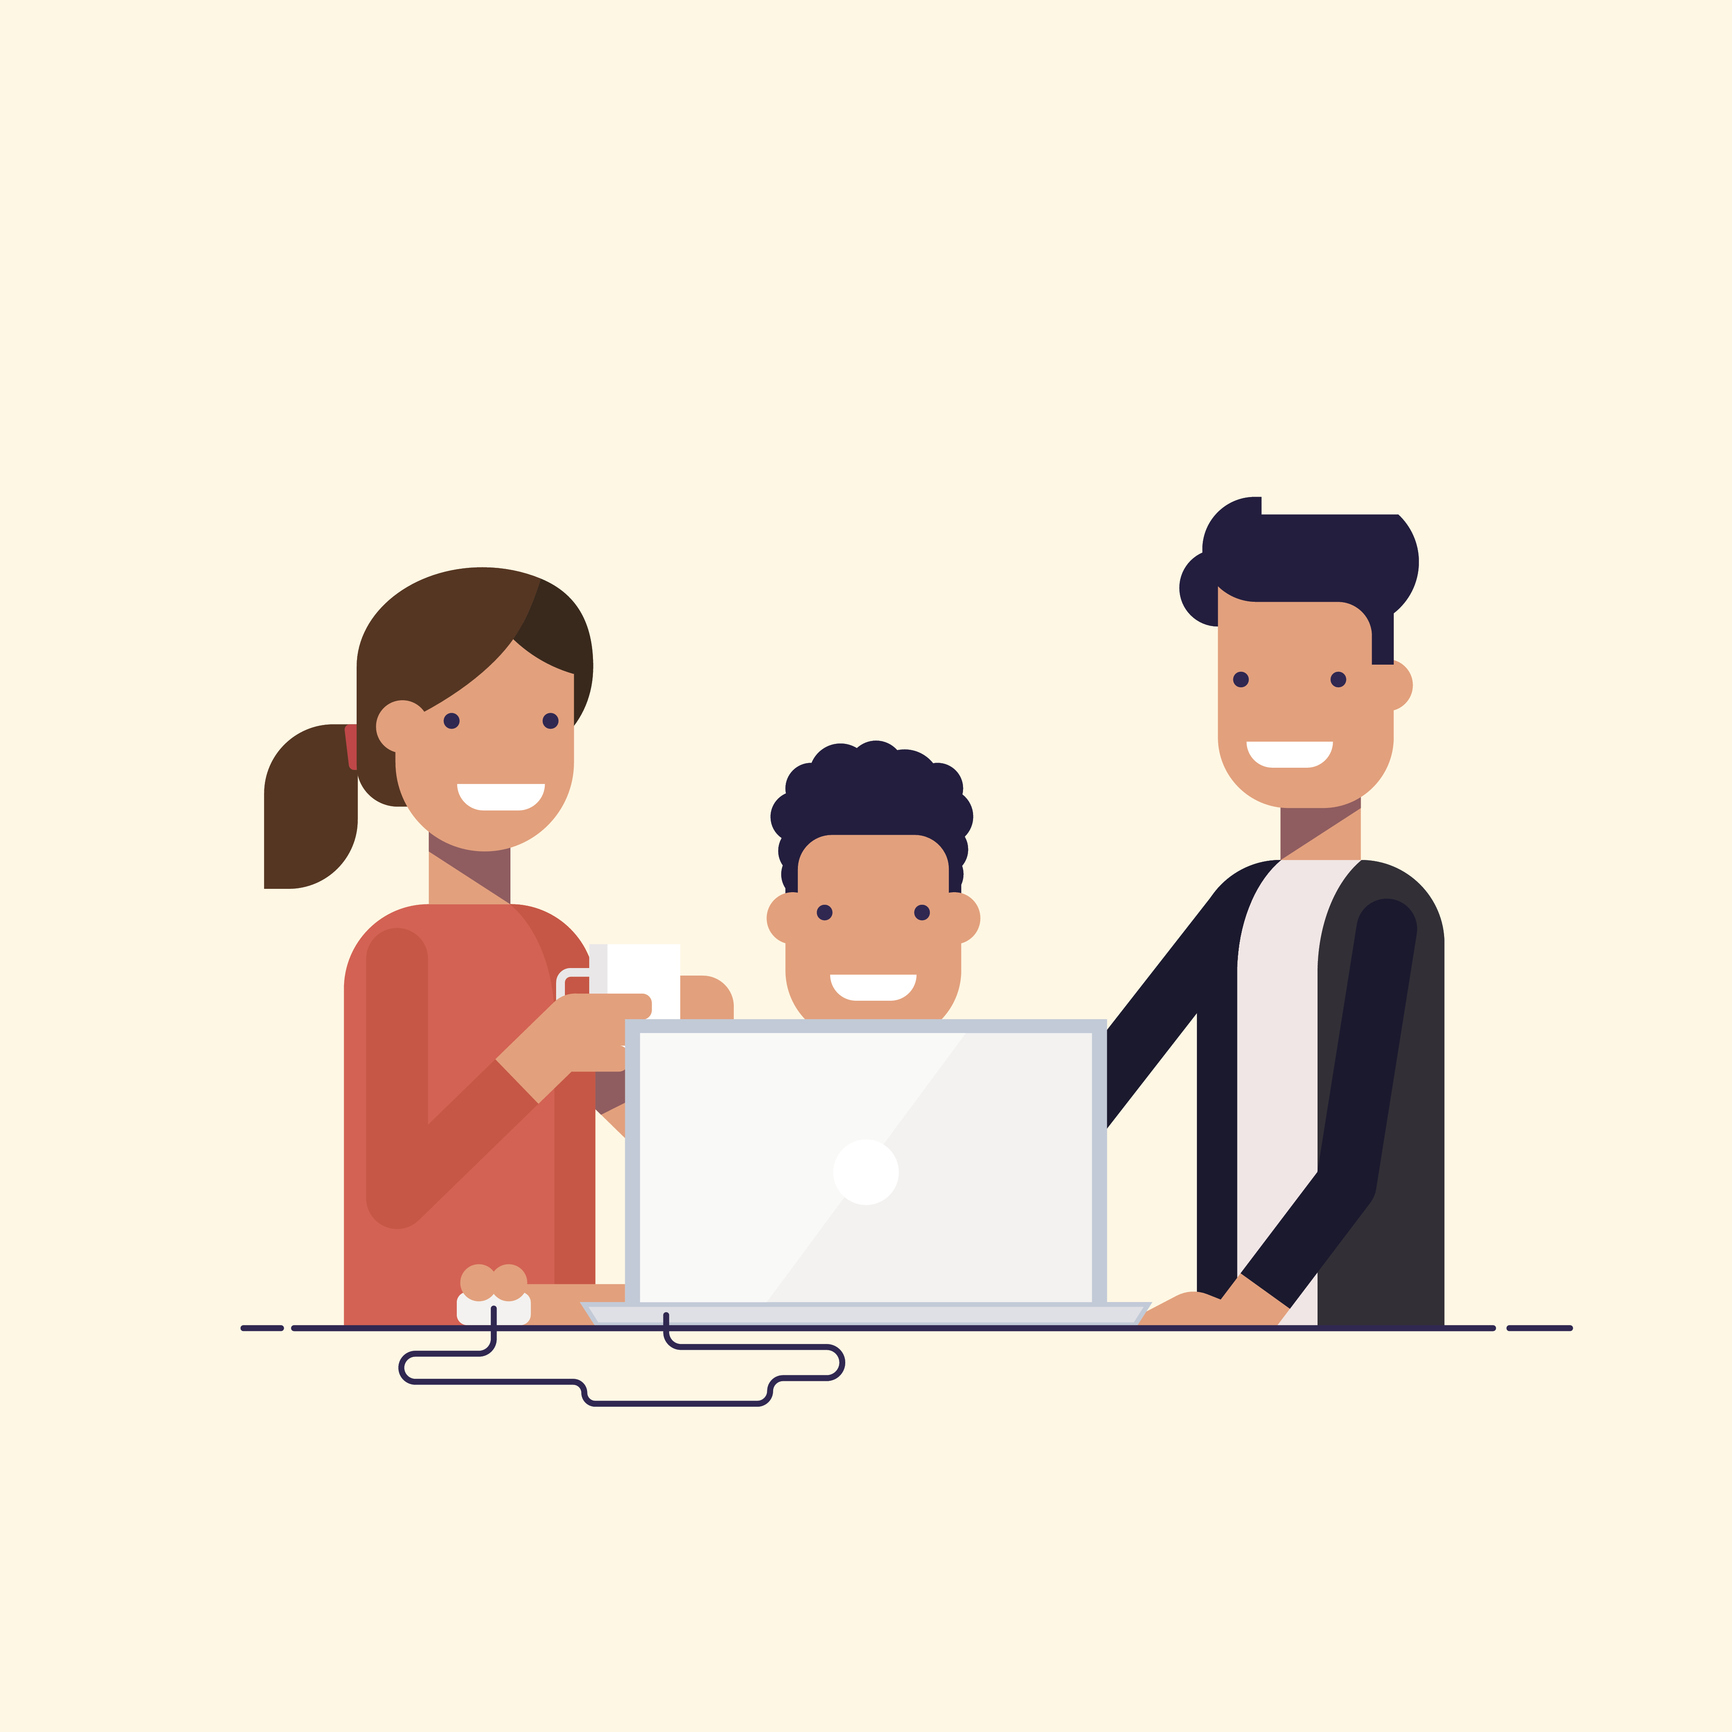 Business team in a work process or parent watch the child. Man sitting at a computer surrounded by employees. Team problem solving. A man in a business suit and woman drinking coffee. Cartoon flat.